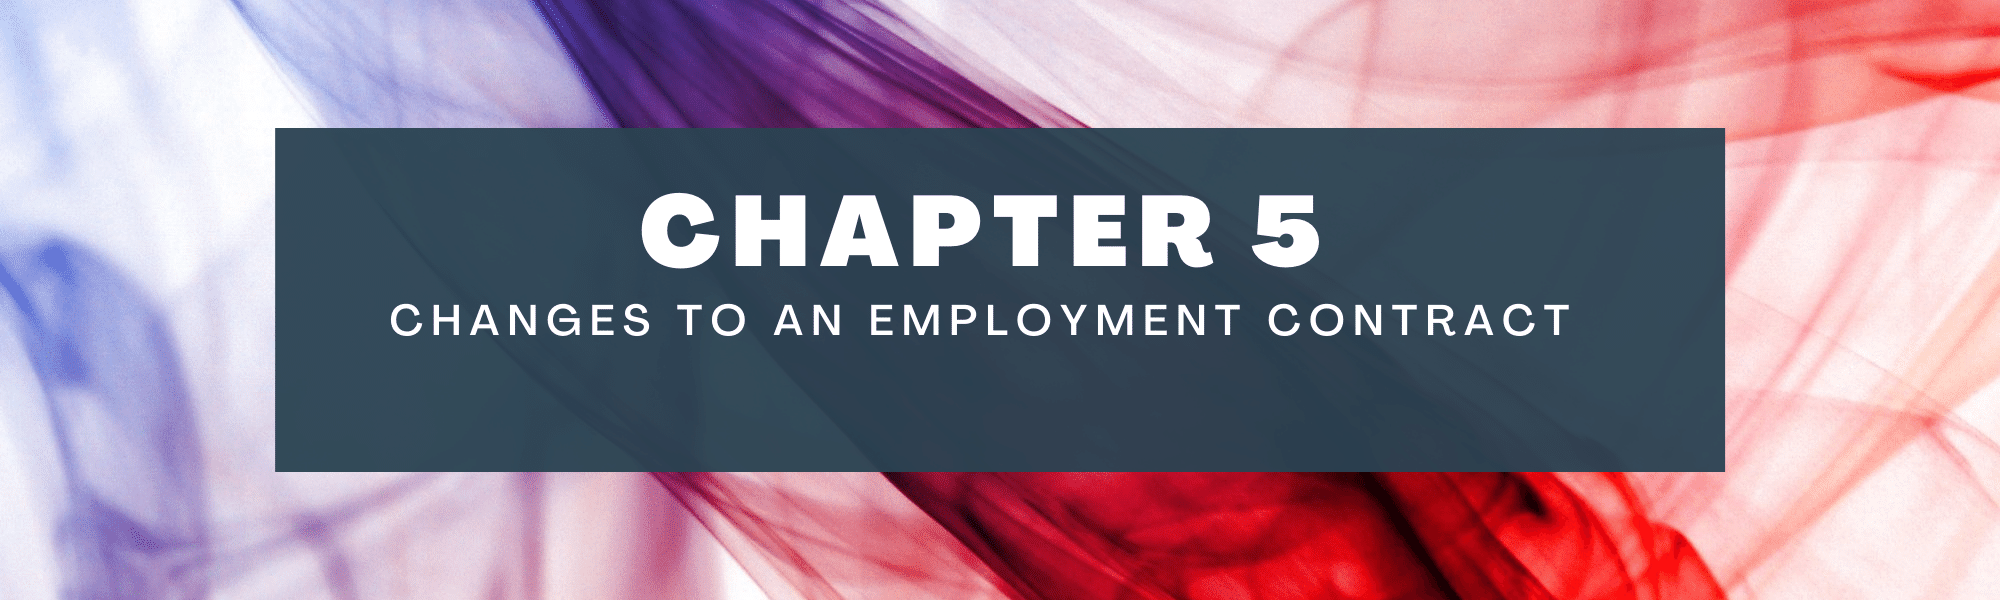 Changes to an employment contract